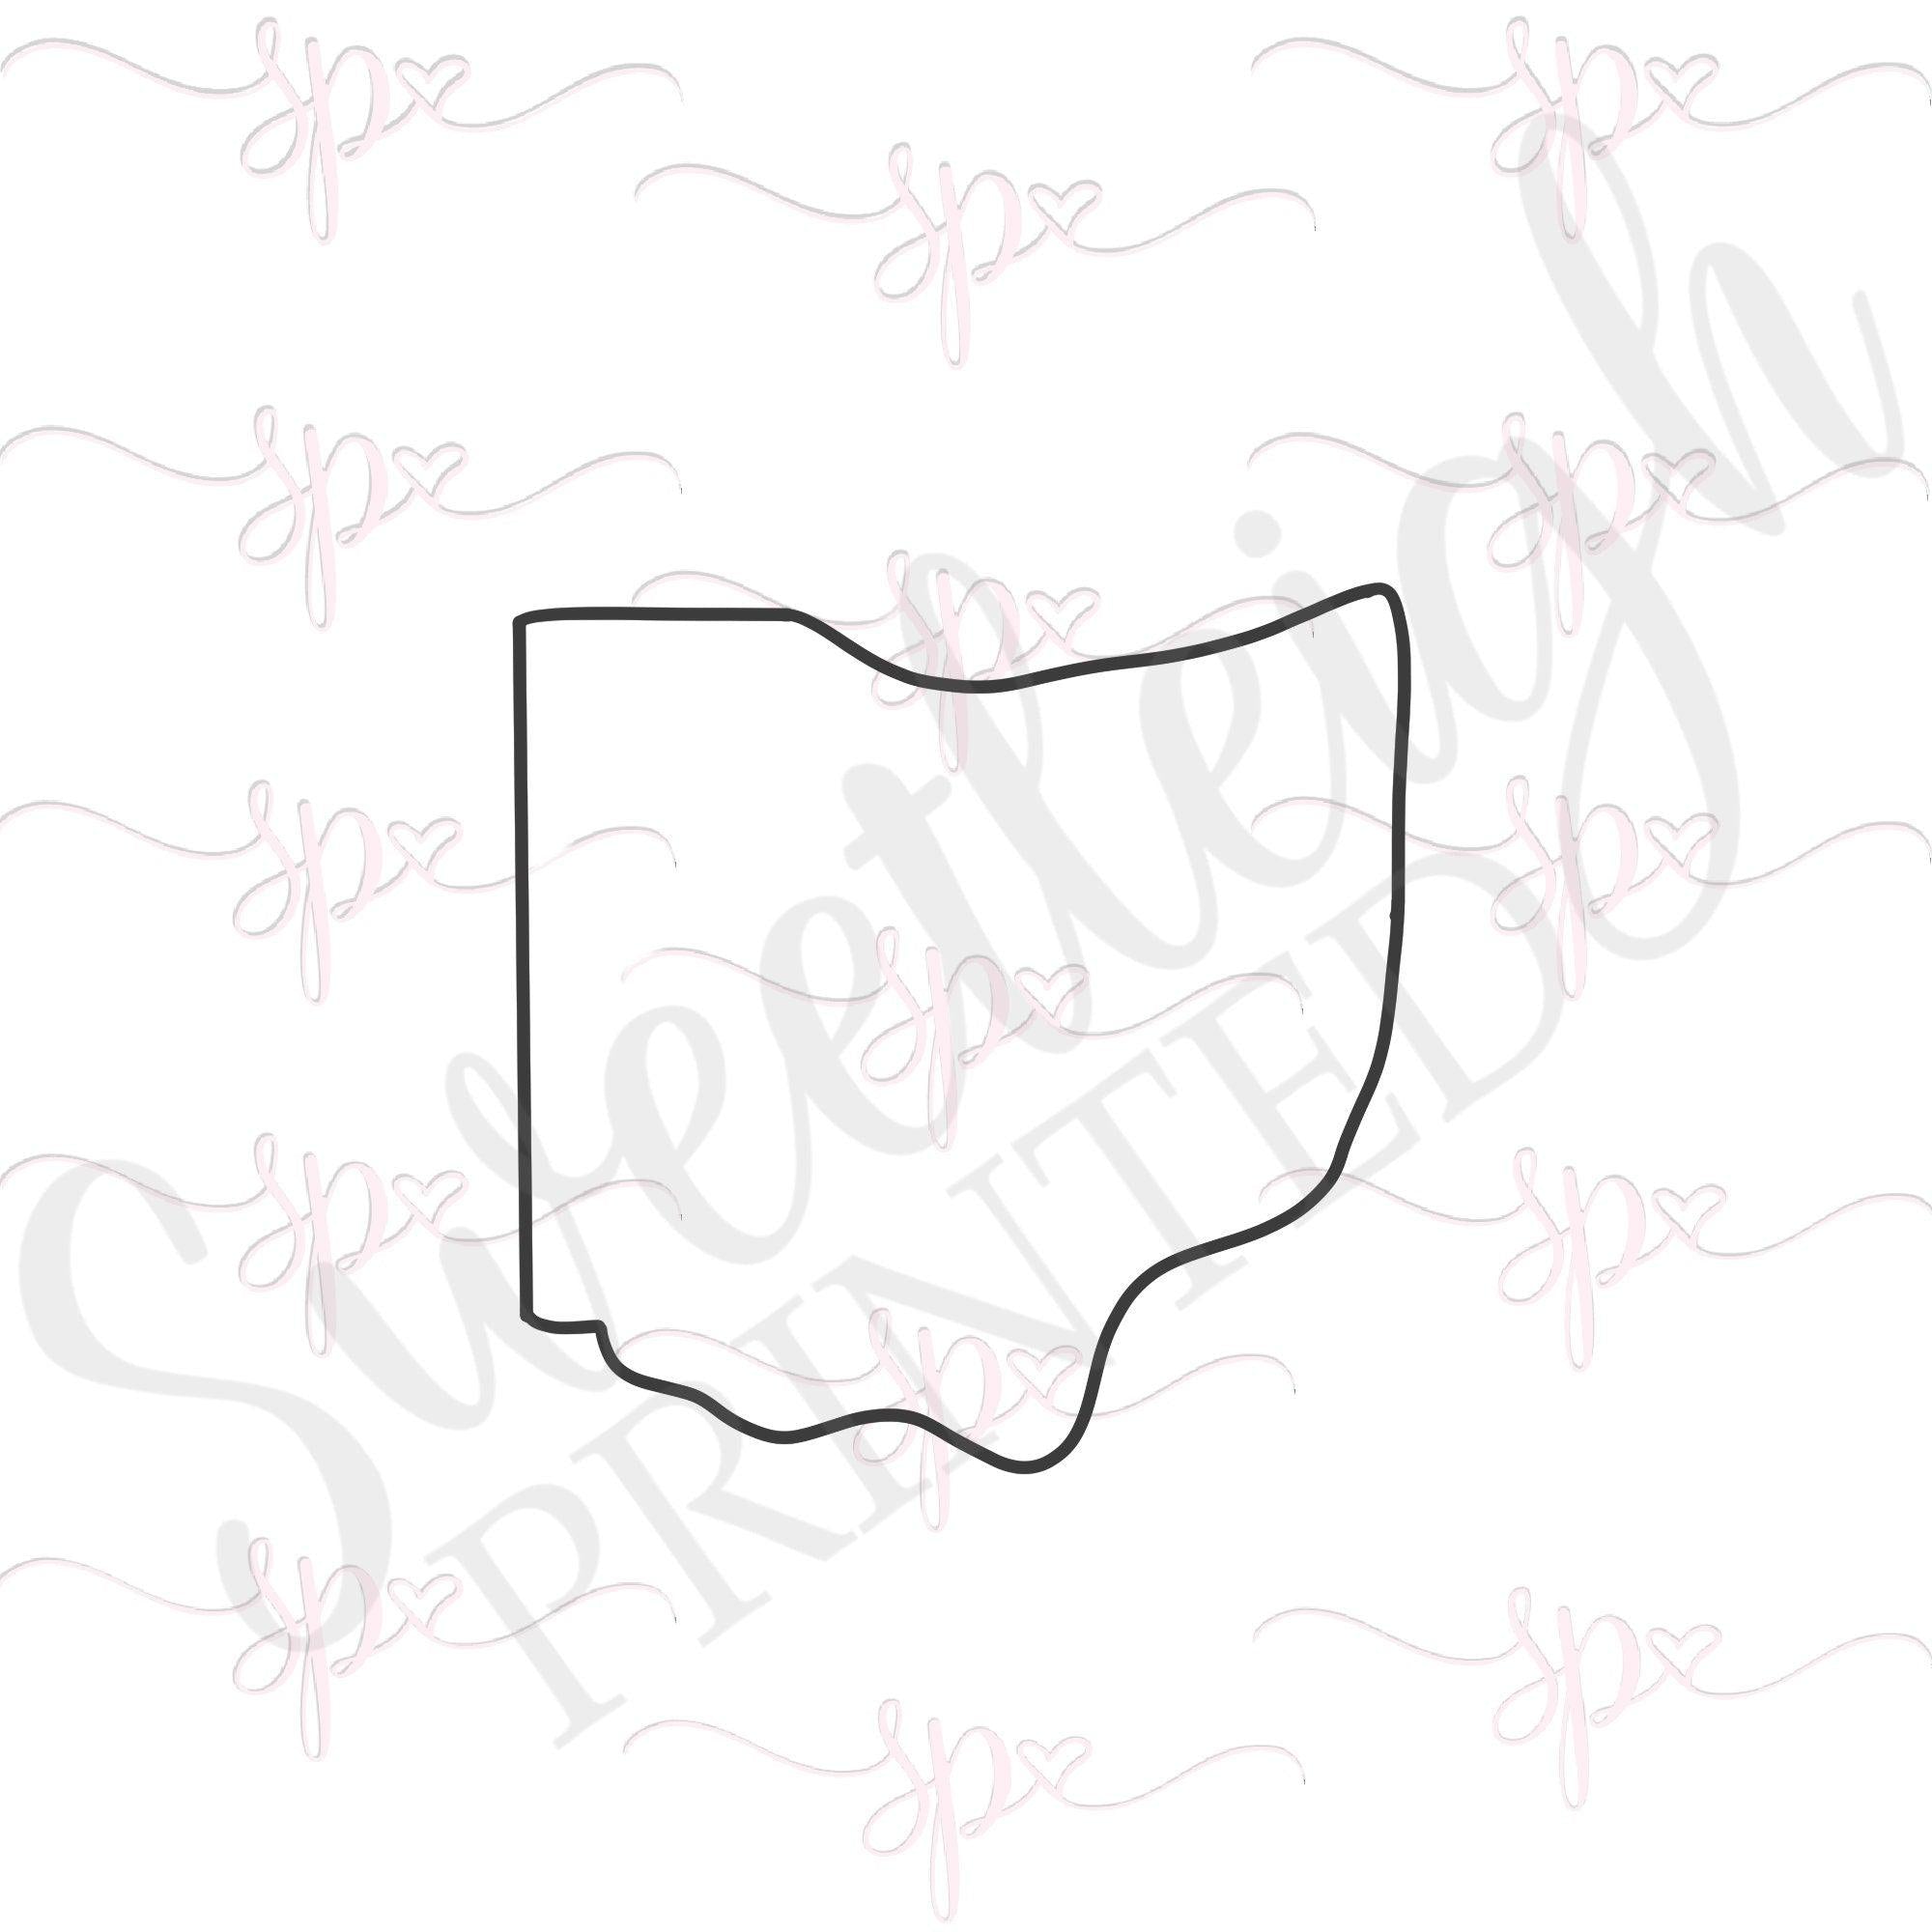 Ohio Cookie Cutter - Sweetleigh 